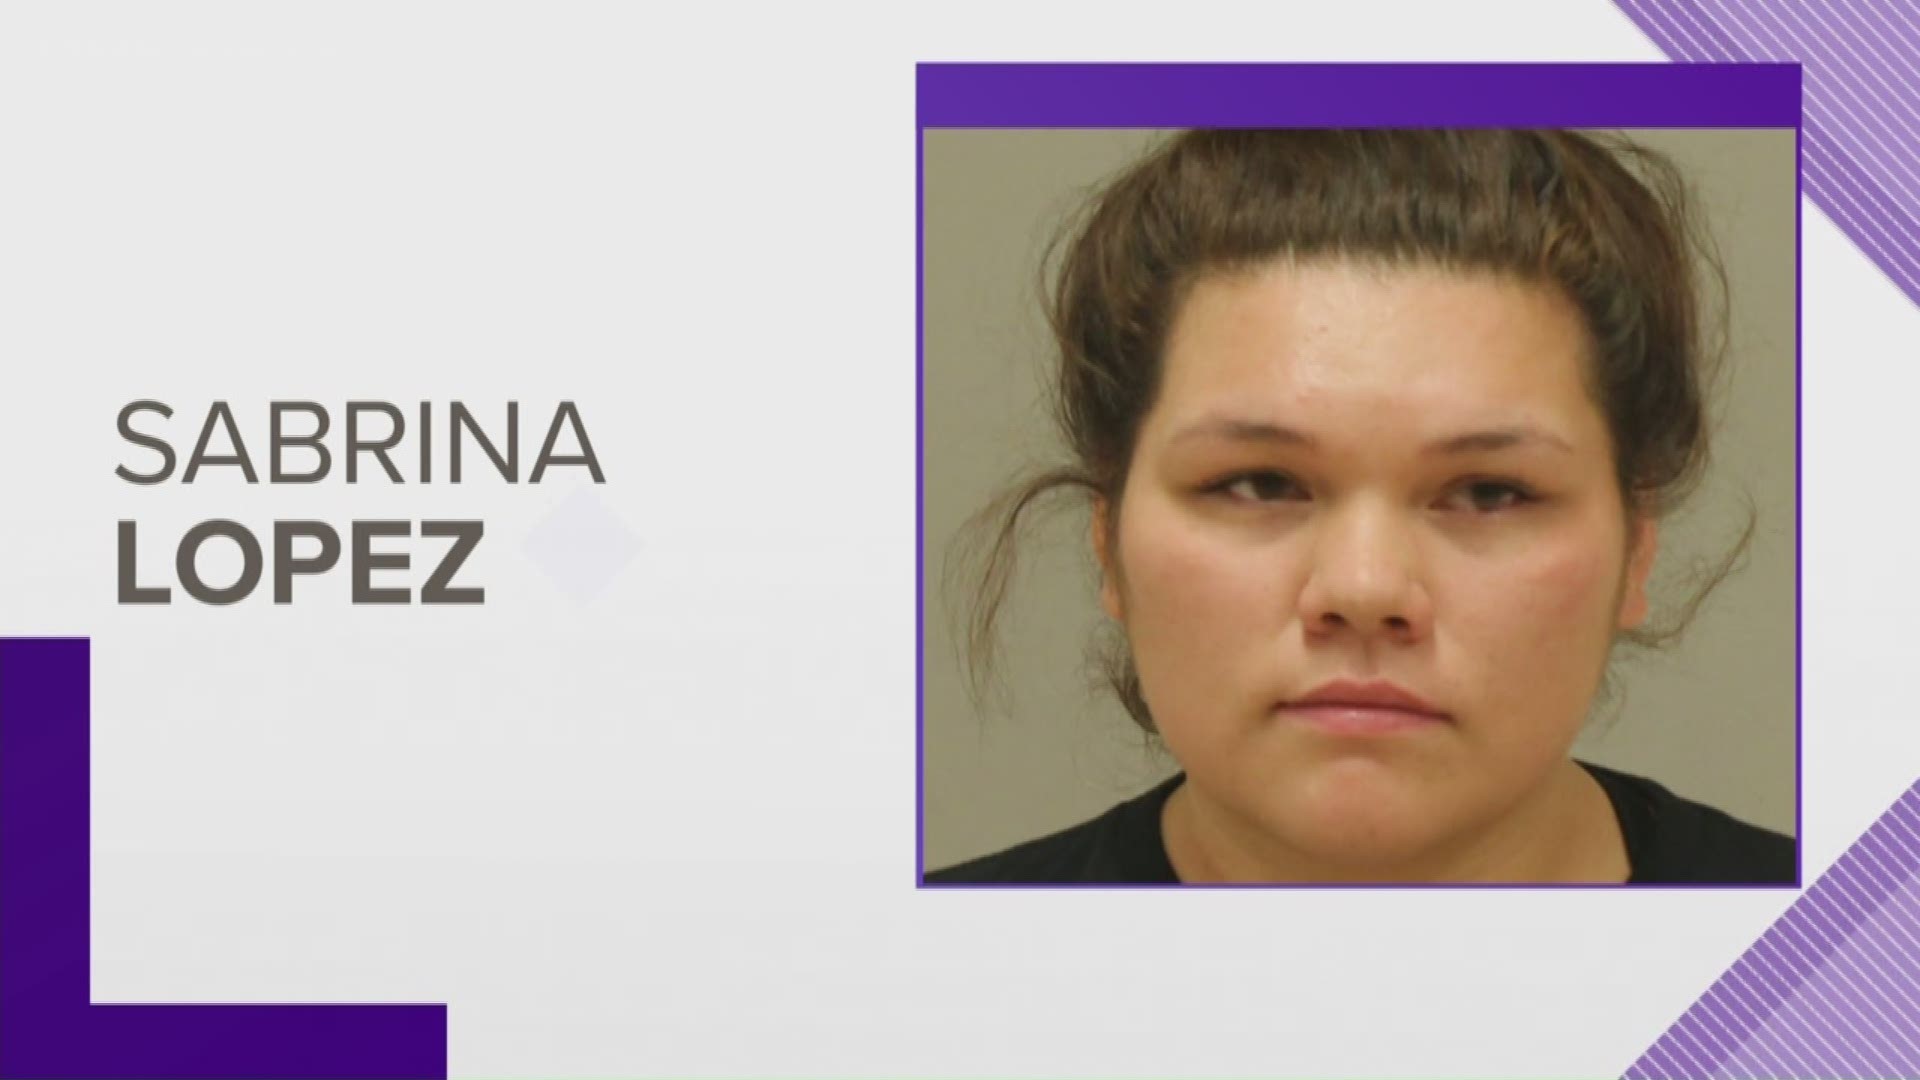 A Grand Rapids woman who went on a multi-state shopping spree, using stolen credit card numbers, has been sentenced to more than four years in prison.